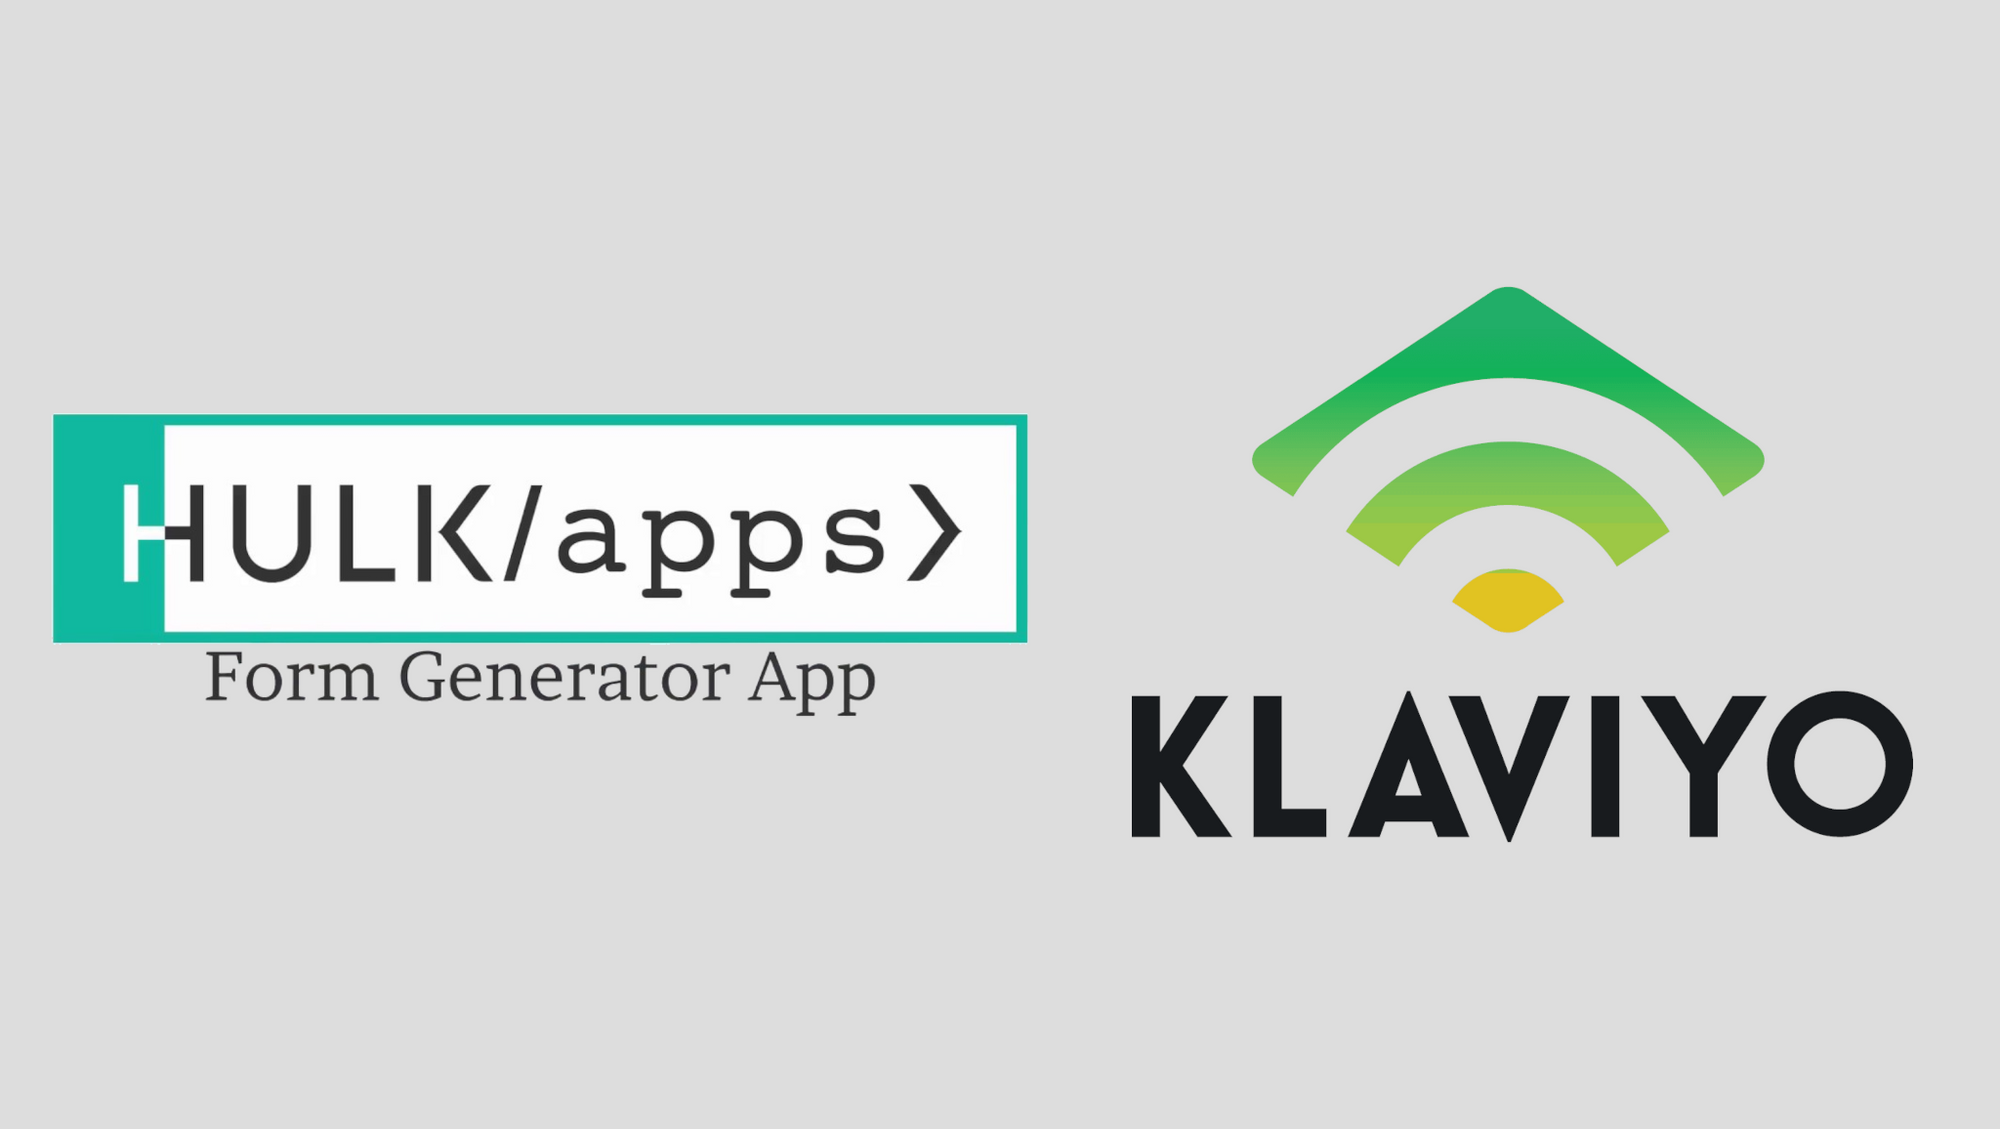 Connecting Hulk Apps Forms to Klaviyo in a Shopify Store